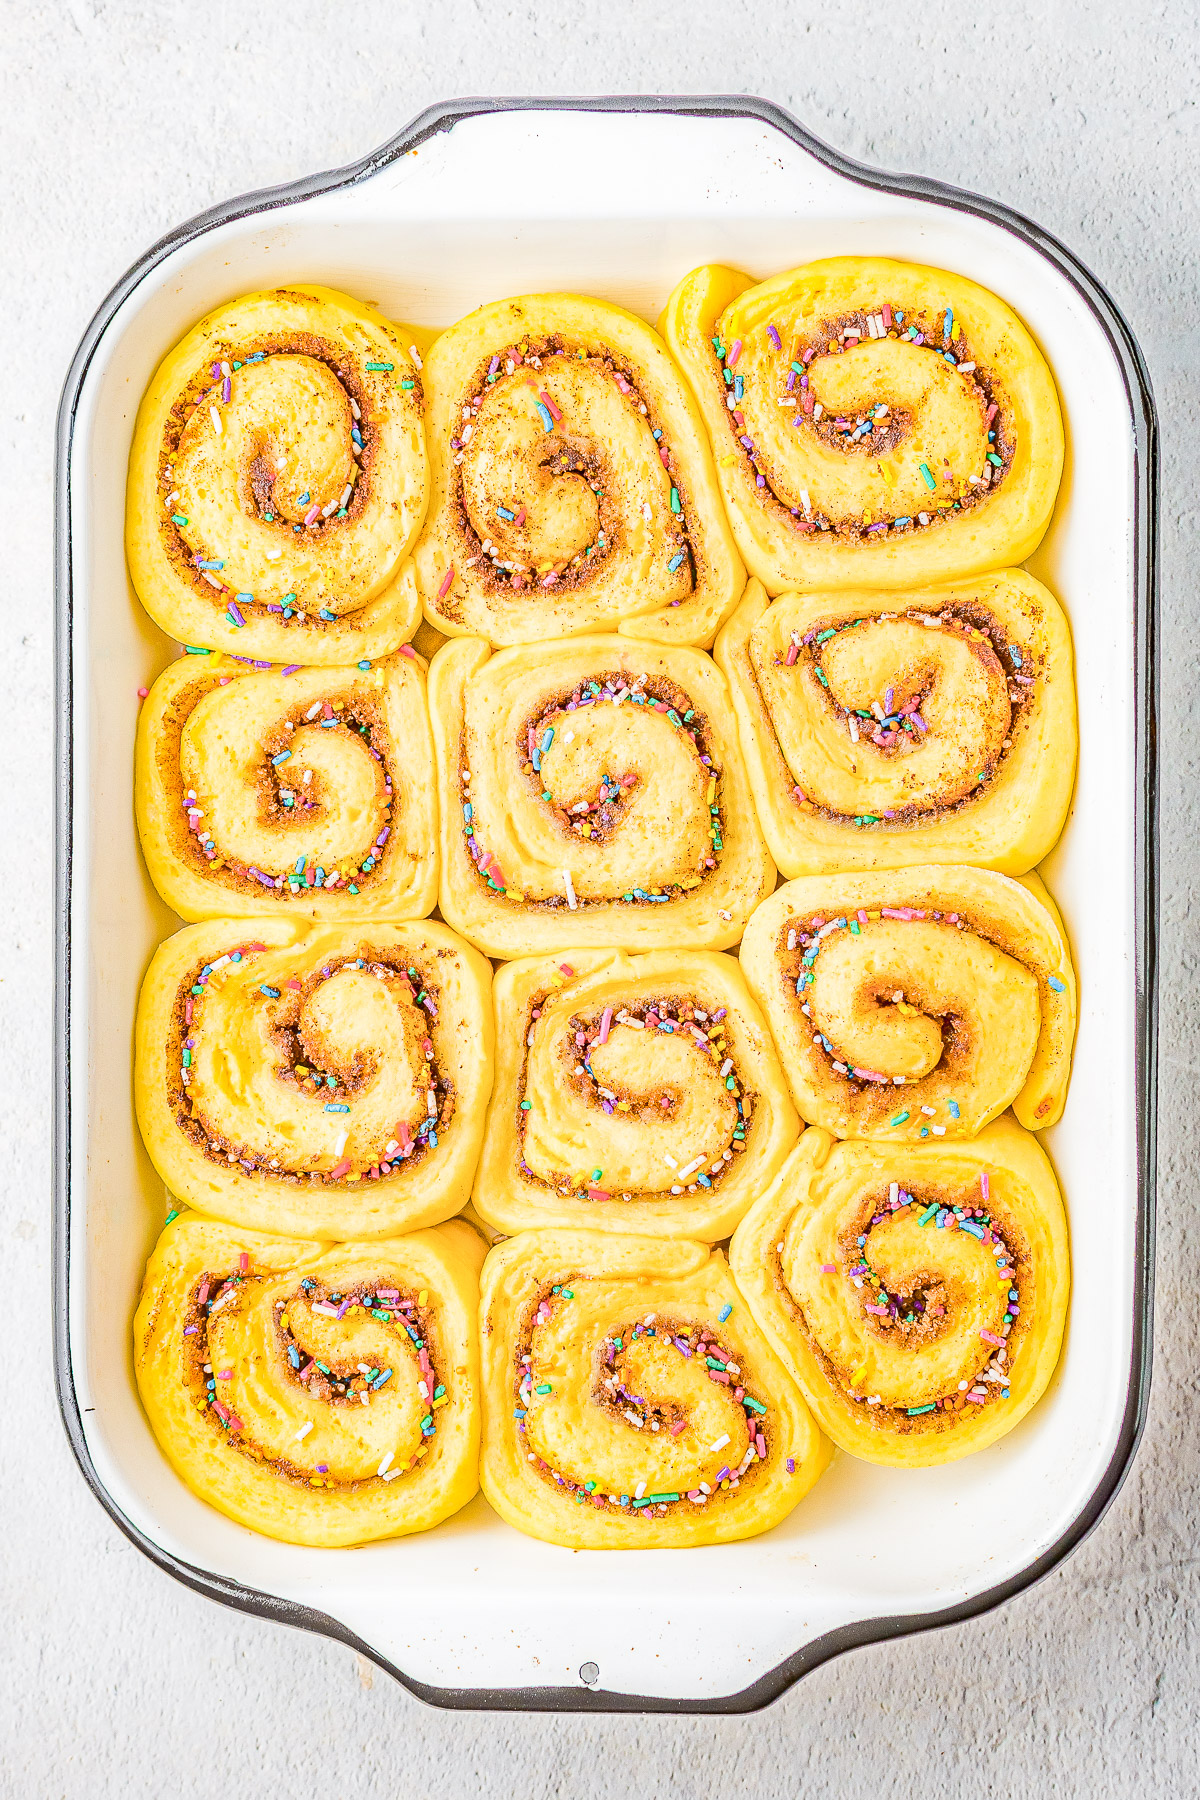 Birthday Cake Cinnamon Rolls - The softest, fluffiest, most tender cinnamon rolls stuffed with cinnamon-and-sugar and rainbow sprinkles! Topped with tangy cream cheese frosting and more sprinkles! The recipe is EASY to follow even if you've never made cinnamon rolls and there's a MAKE AHEAD overnight option!